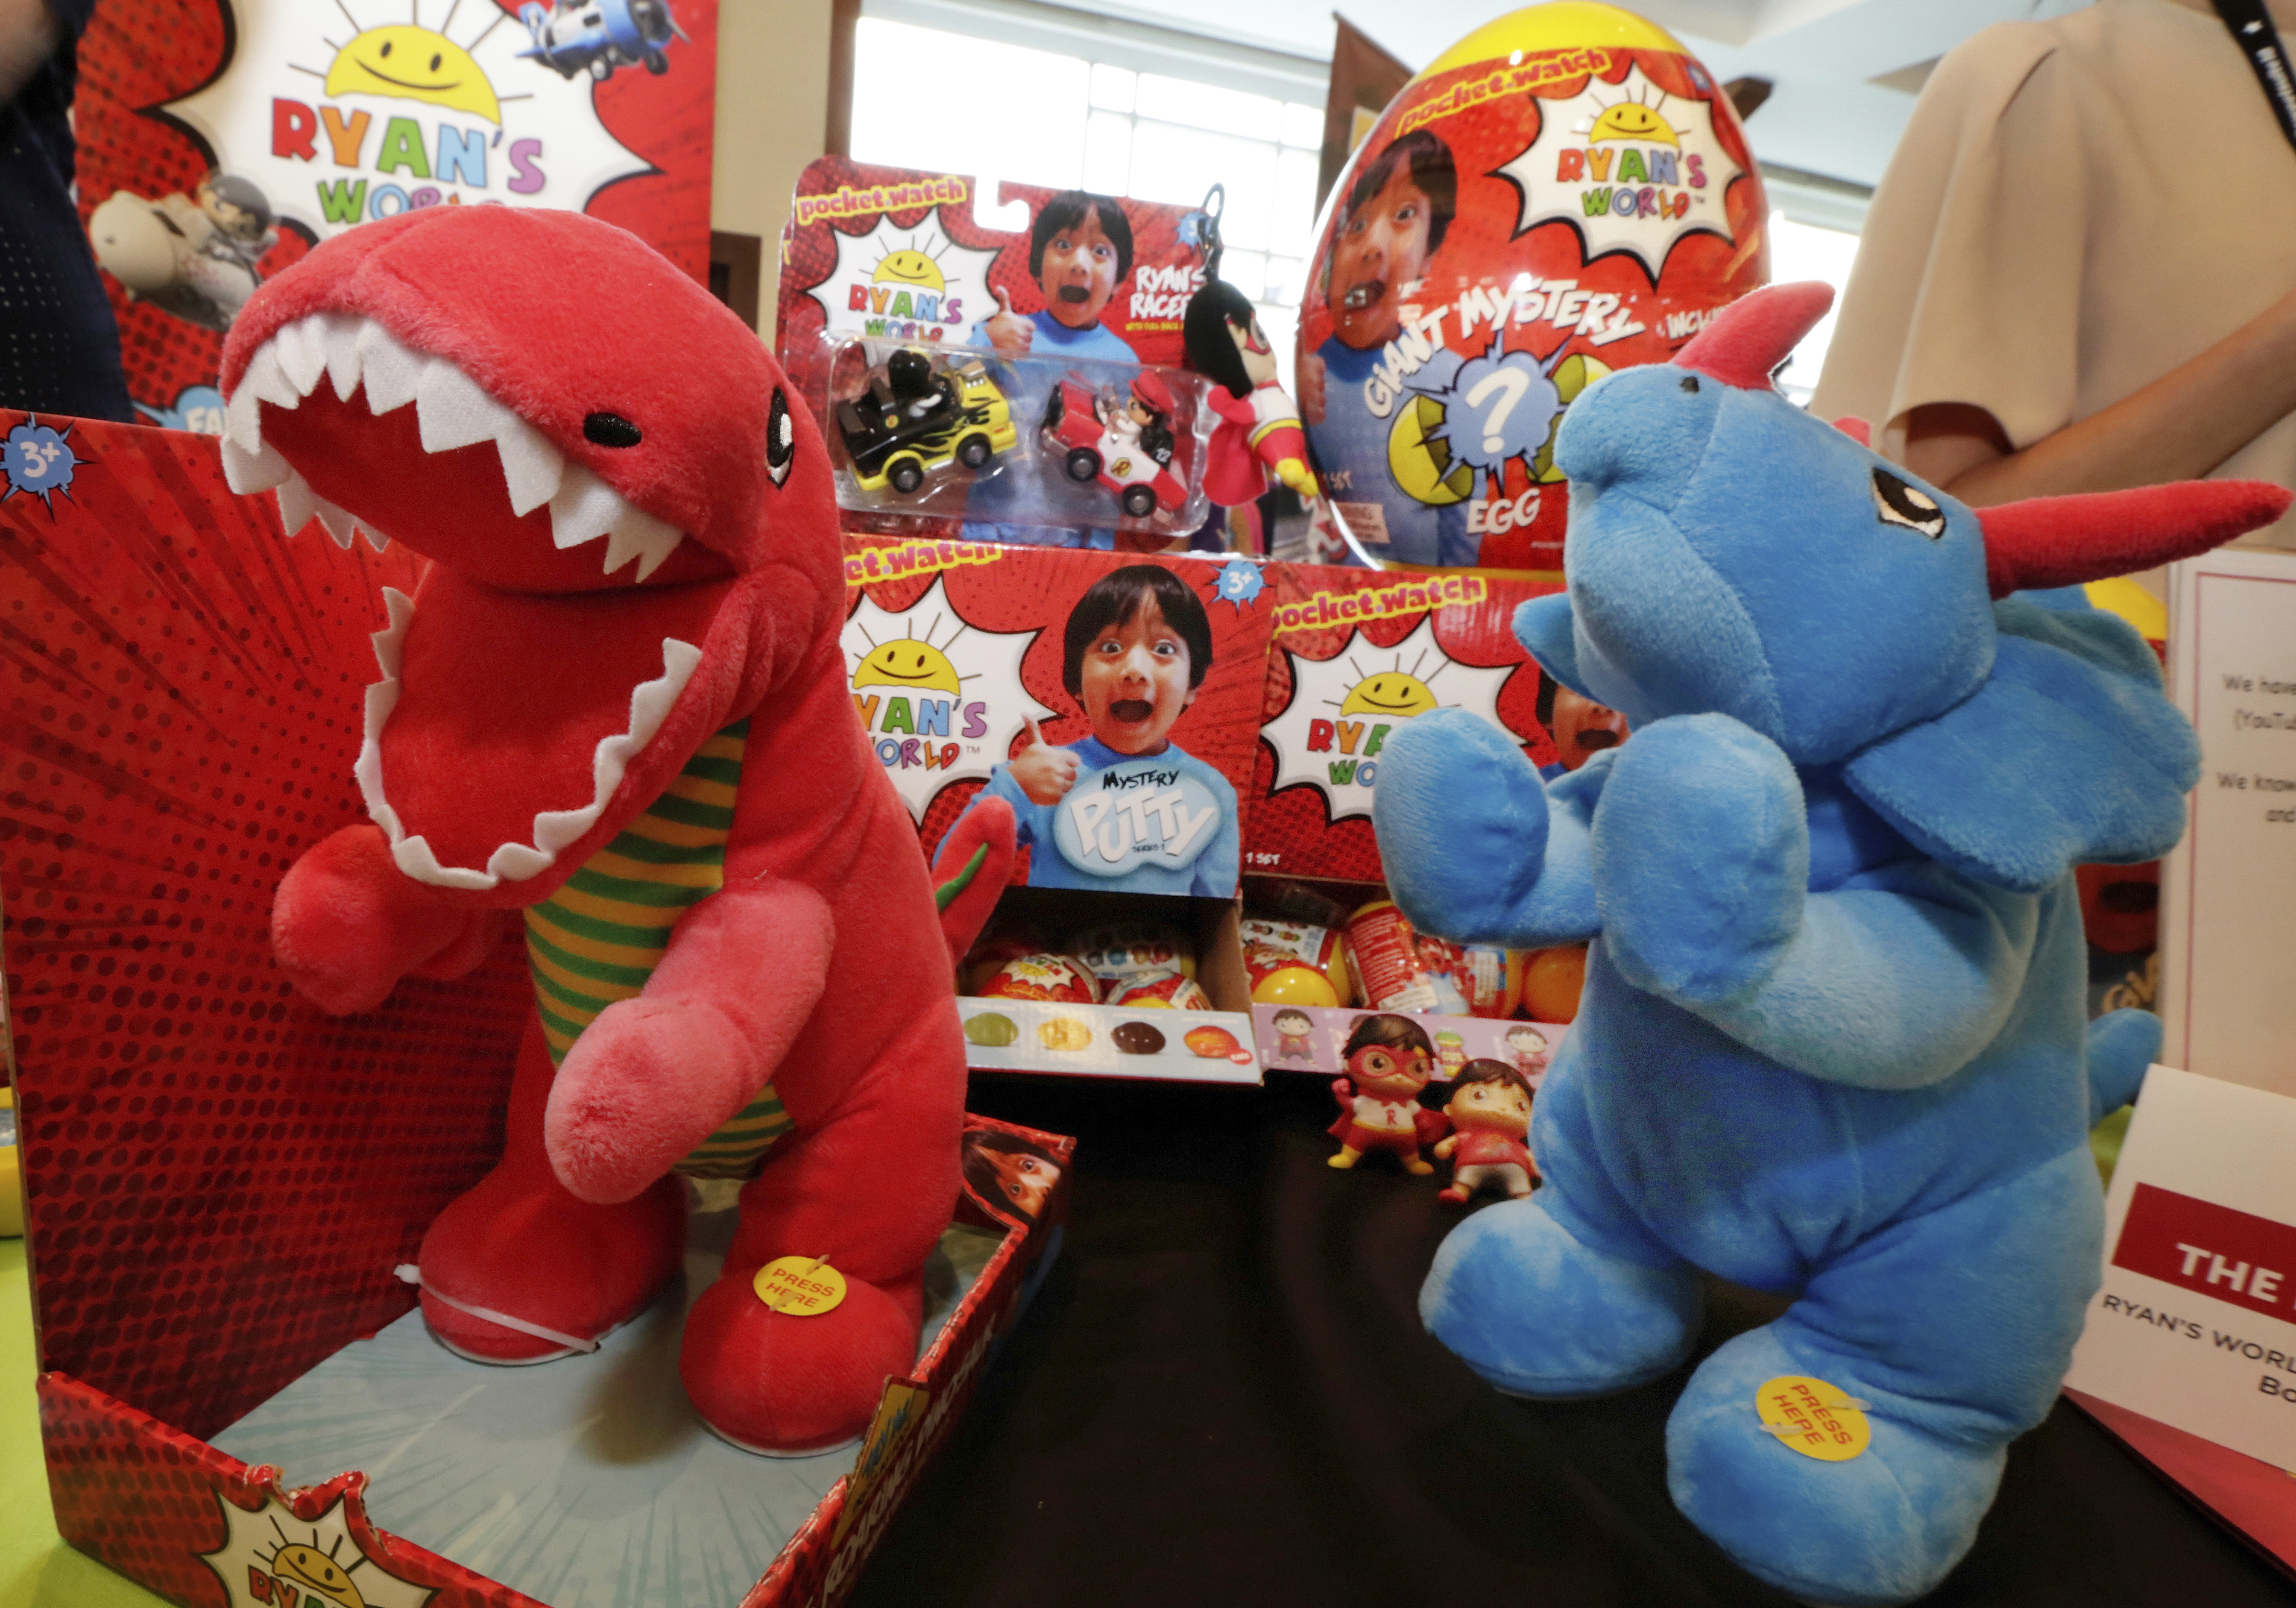 Ryan's World toys, from Bonkers Toys, are displayed at the Toy Insider Sweet Suite show in New York